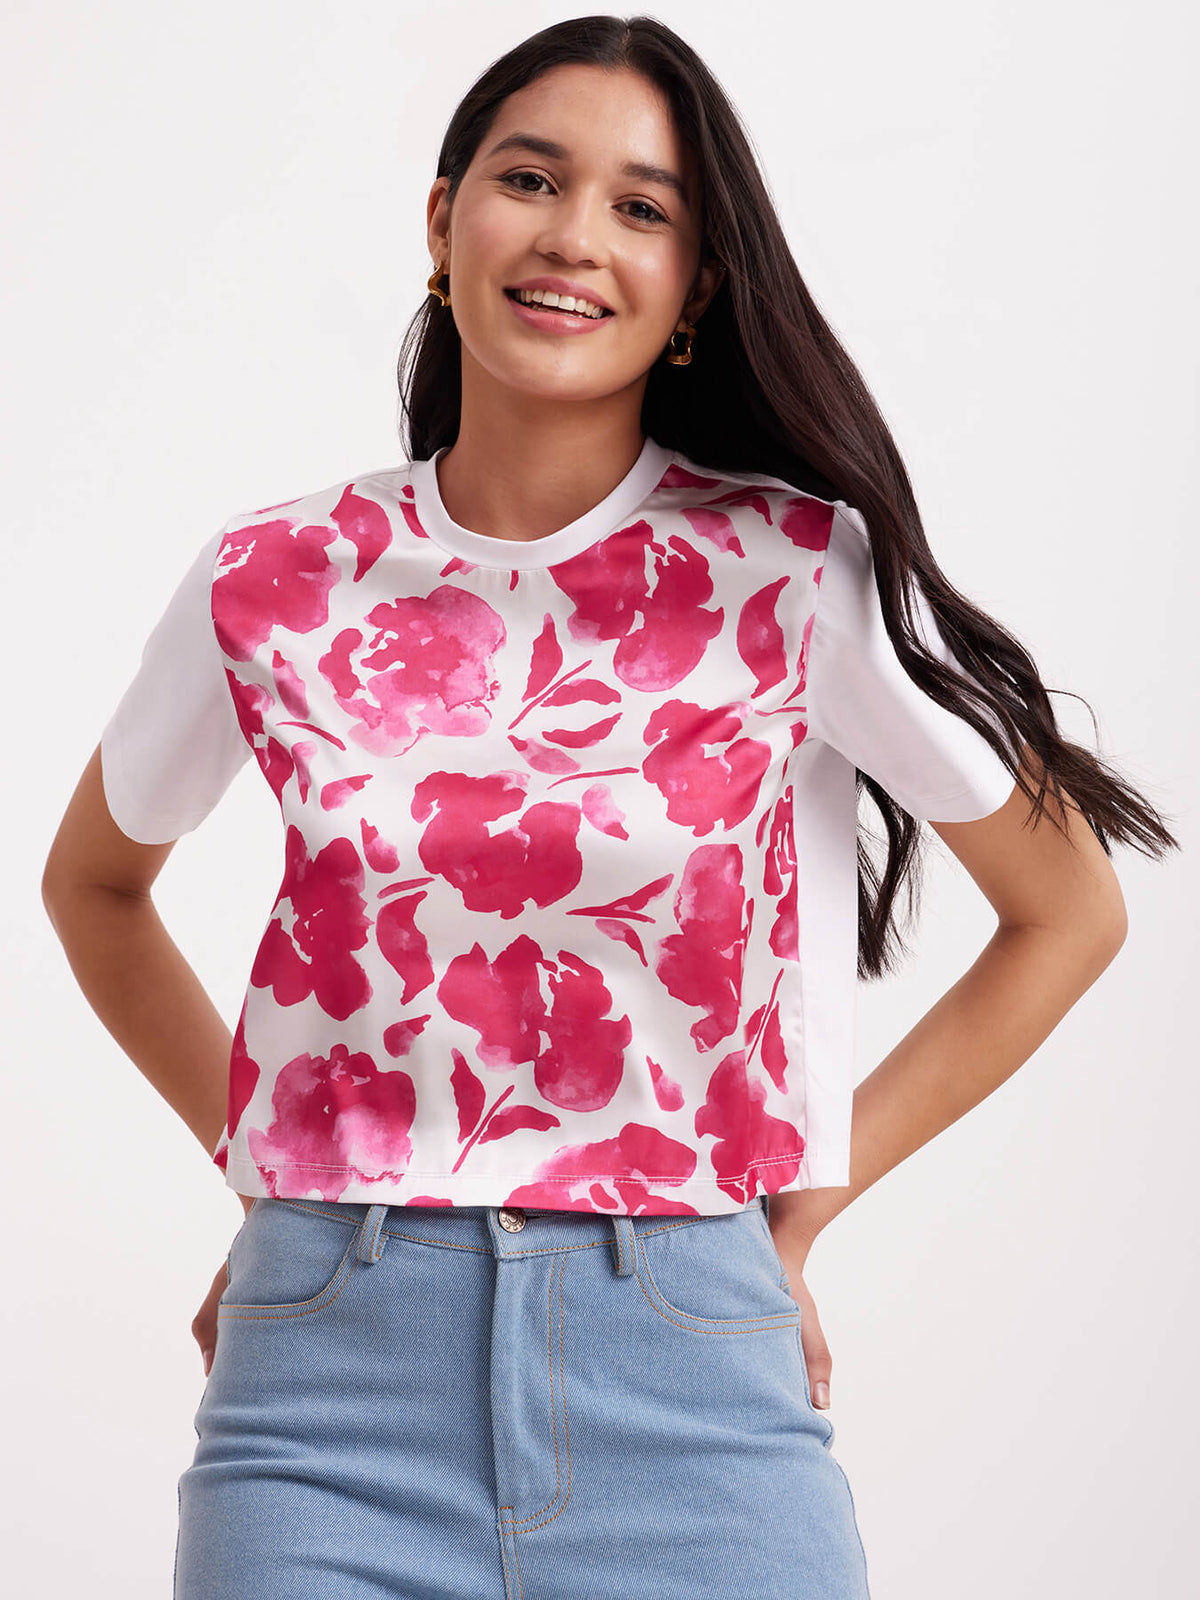 Satin Floral Print Top - Pink And White